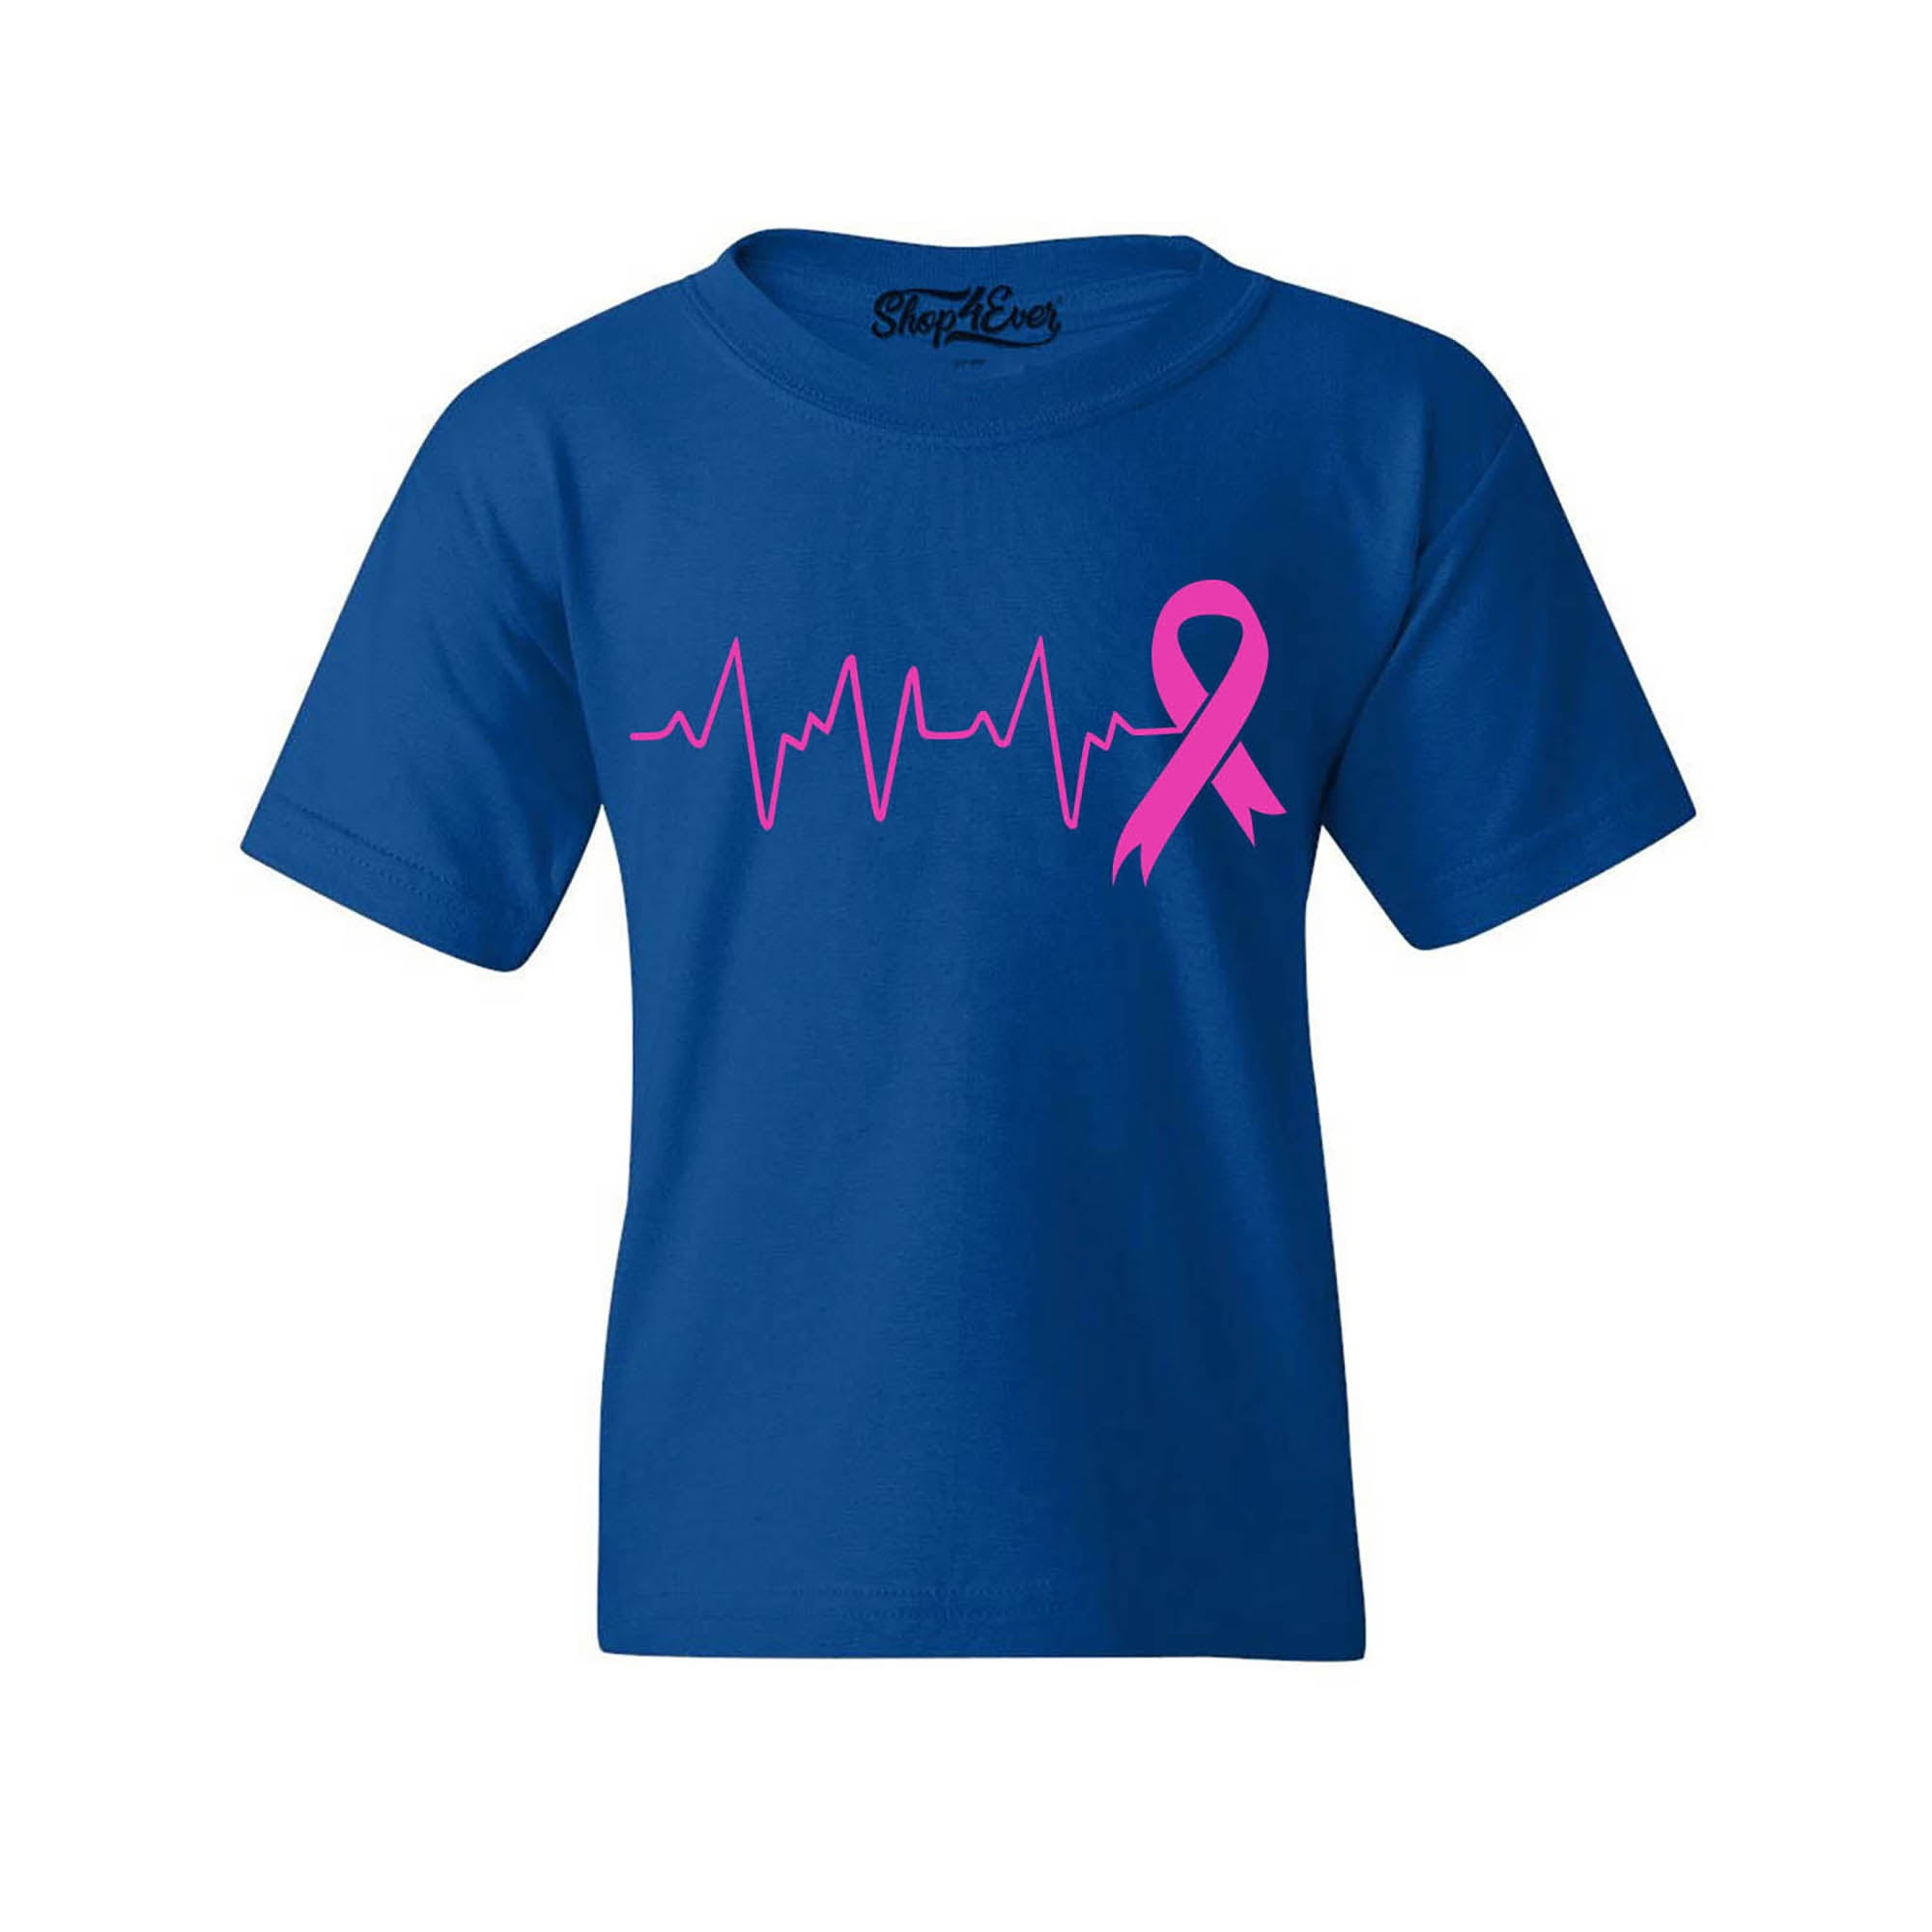 Heartbeat Pink Ribbon Breast Cancer Awareness Youth's T-Shirt